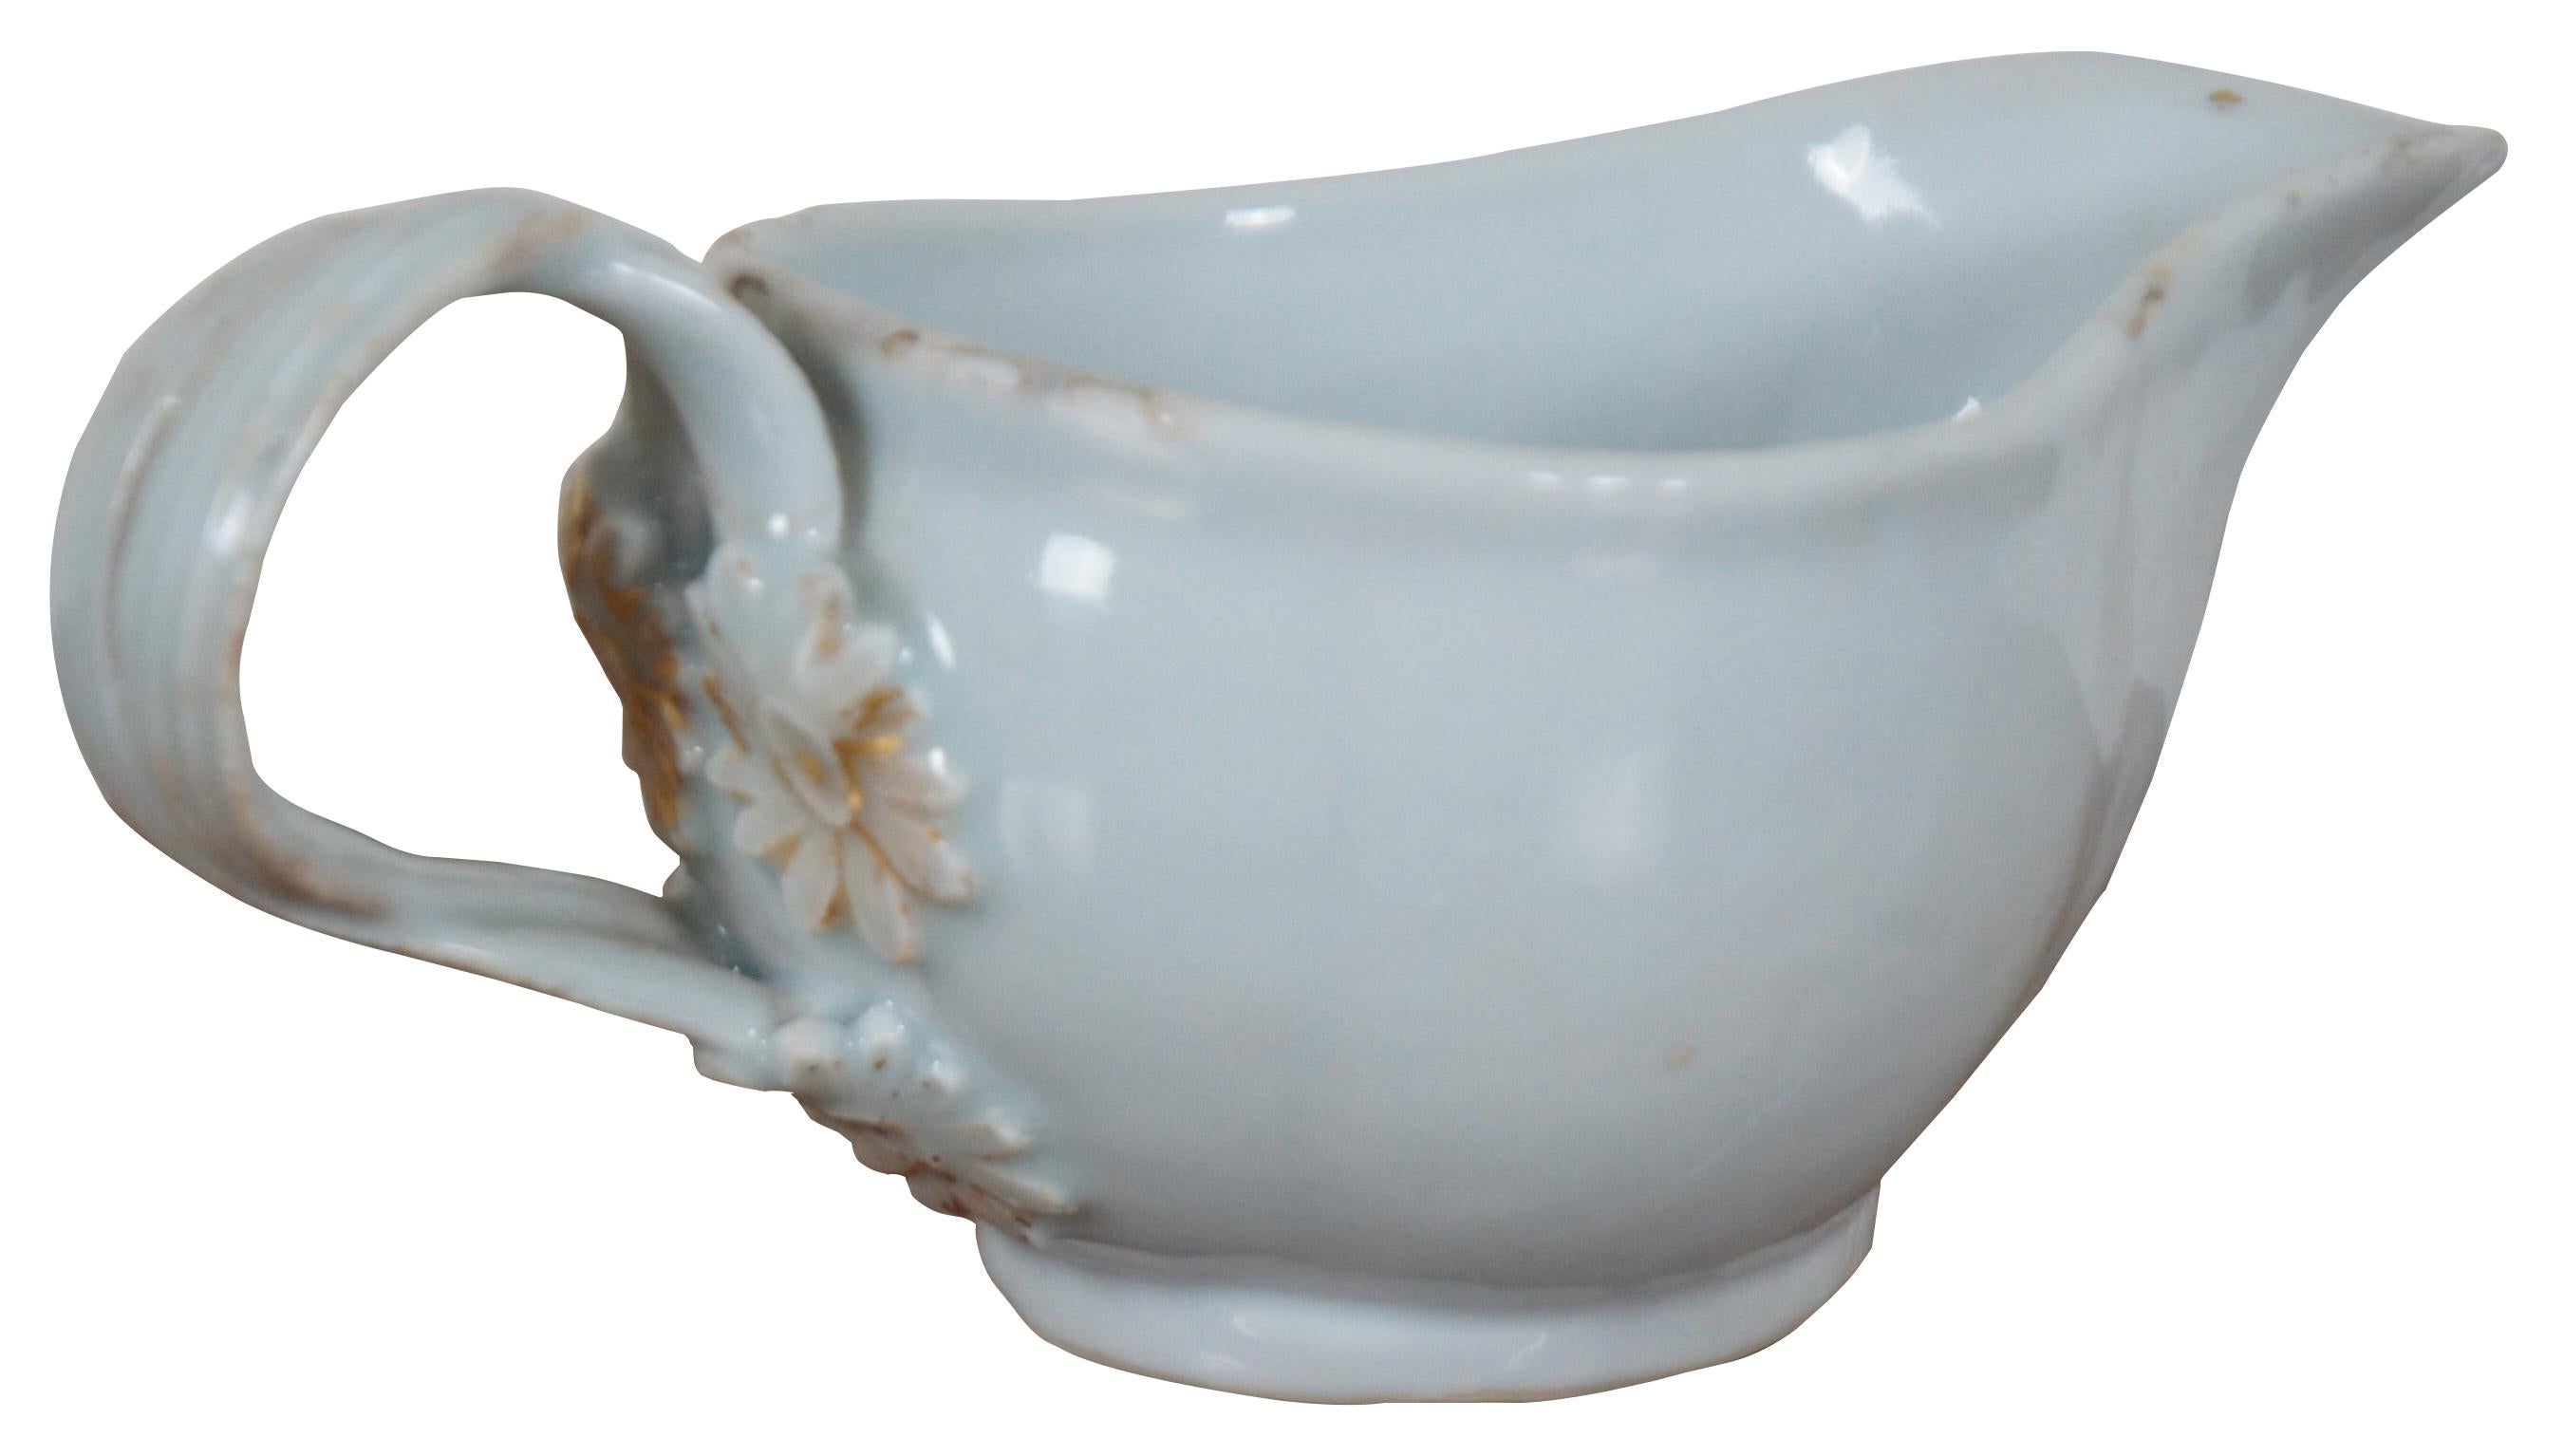 Antique 18th century Chinese Export (Qianlong Period, circa 1780) porcelain gravy boat or creamer with gilded accents and armorial coat of arms, finished in a pale blue tinted glaze. Measure: 7